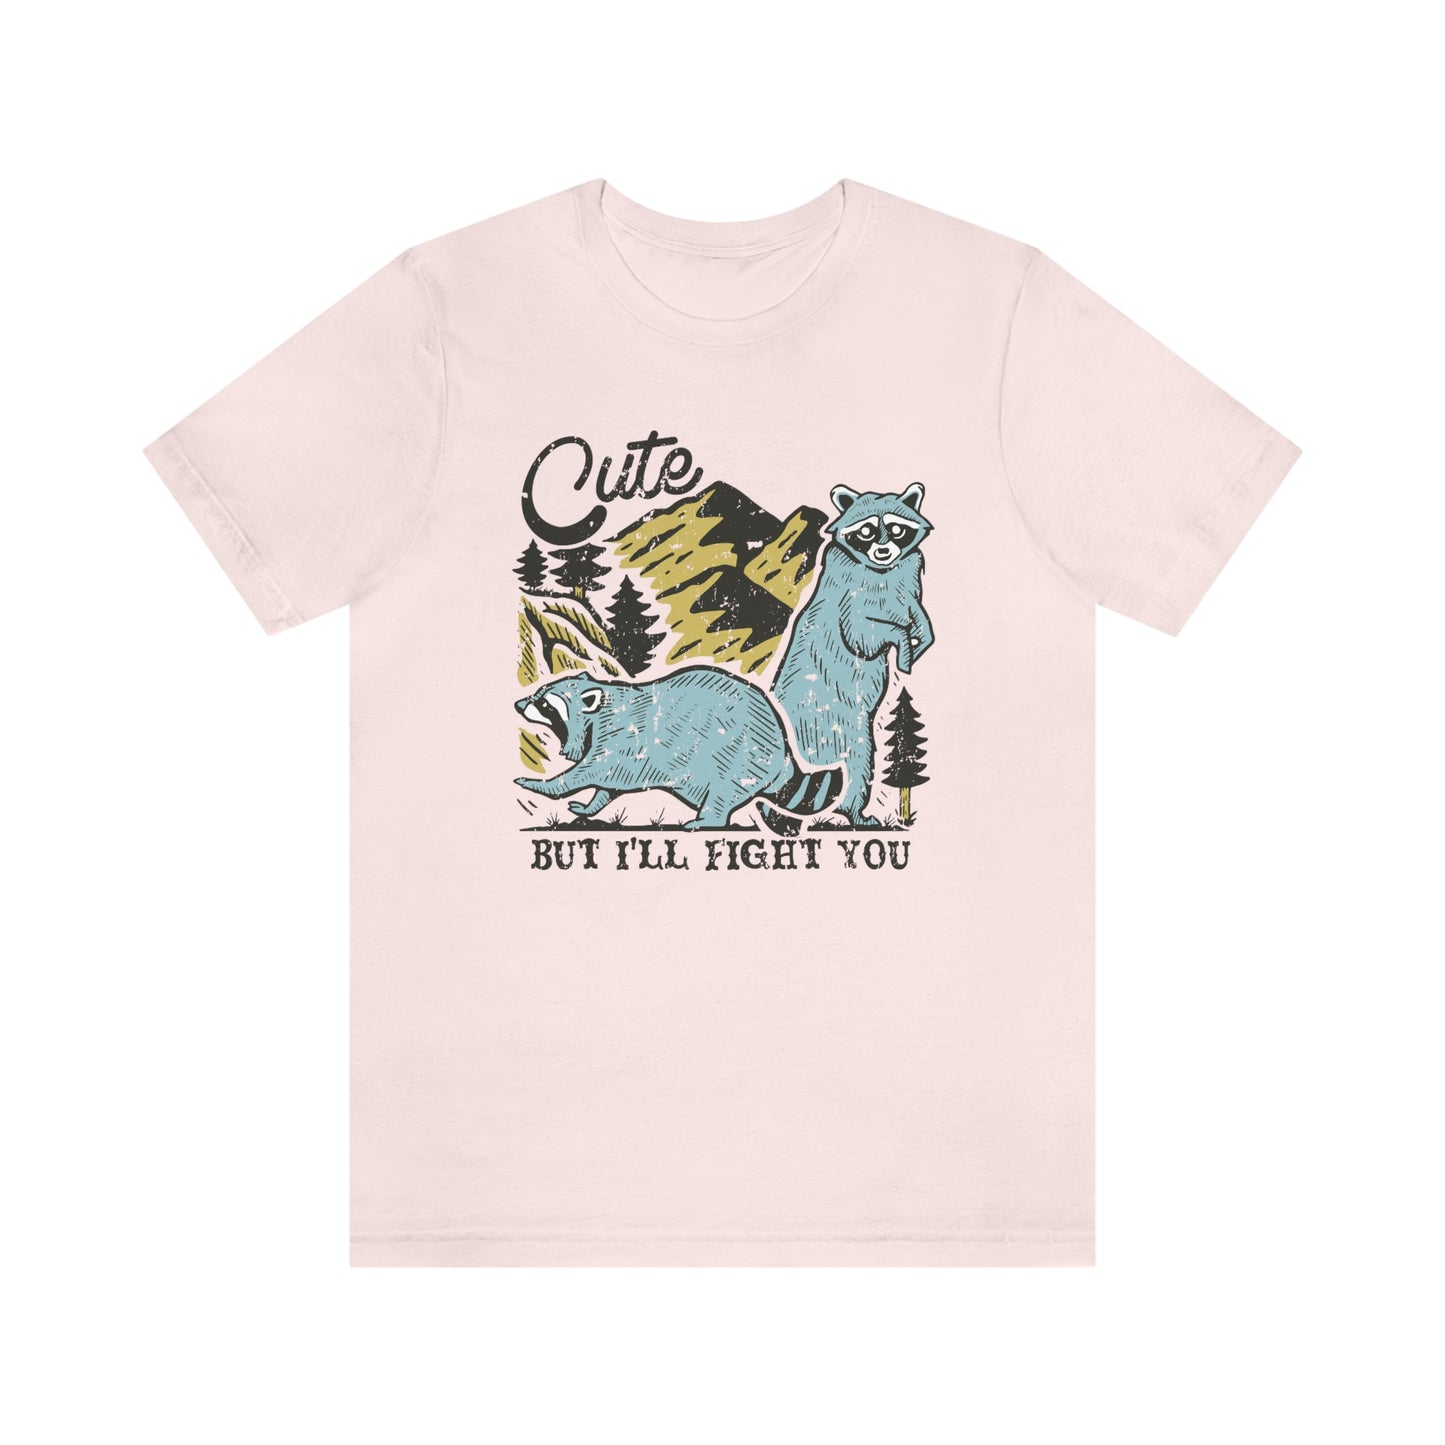 "Cute, but I'll fight you" Bella Canvas Unisex Jersey Short Sleeve Tee